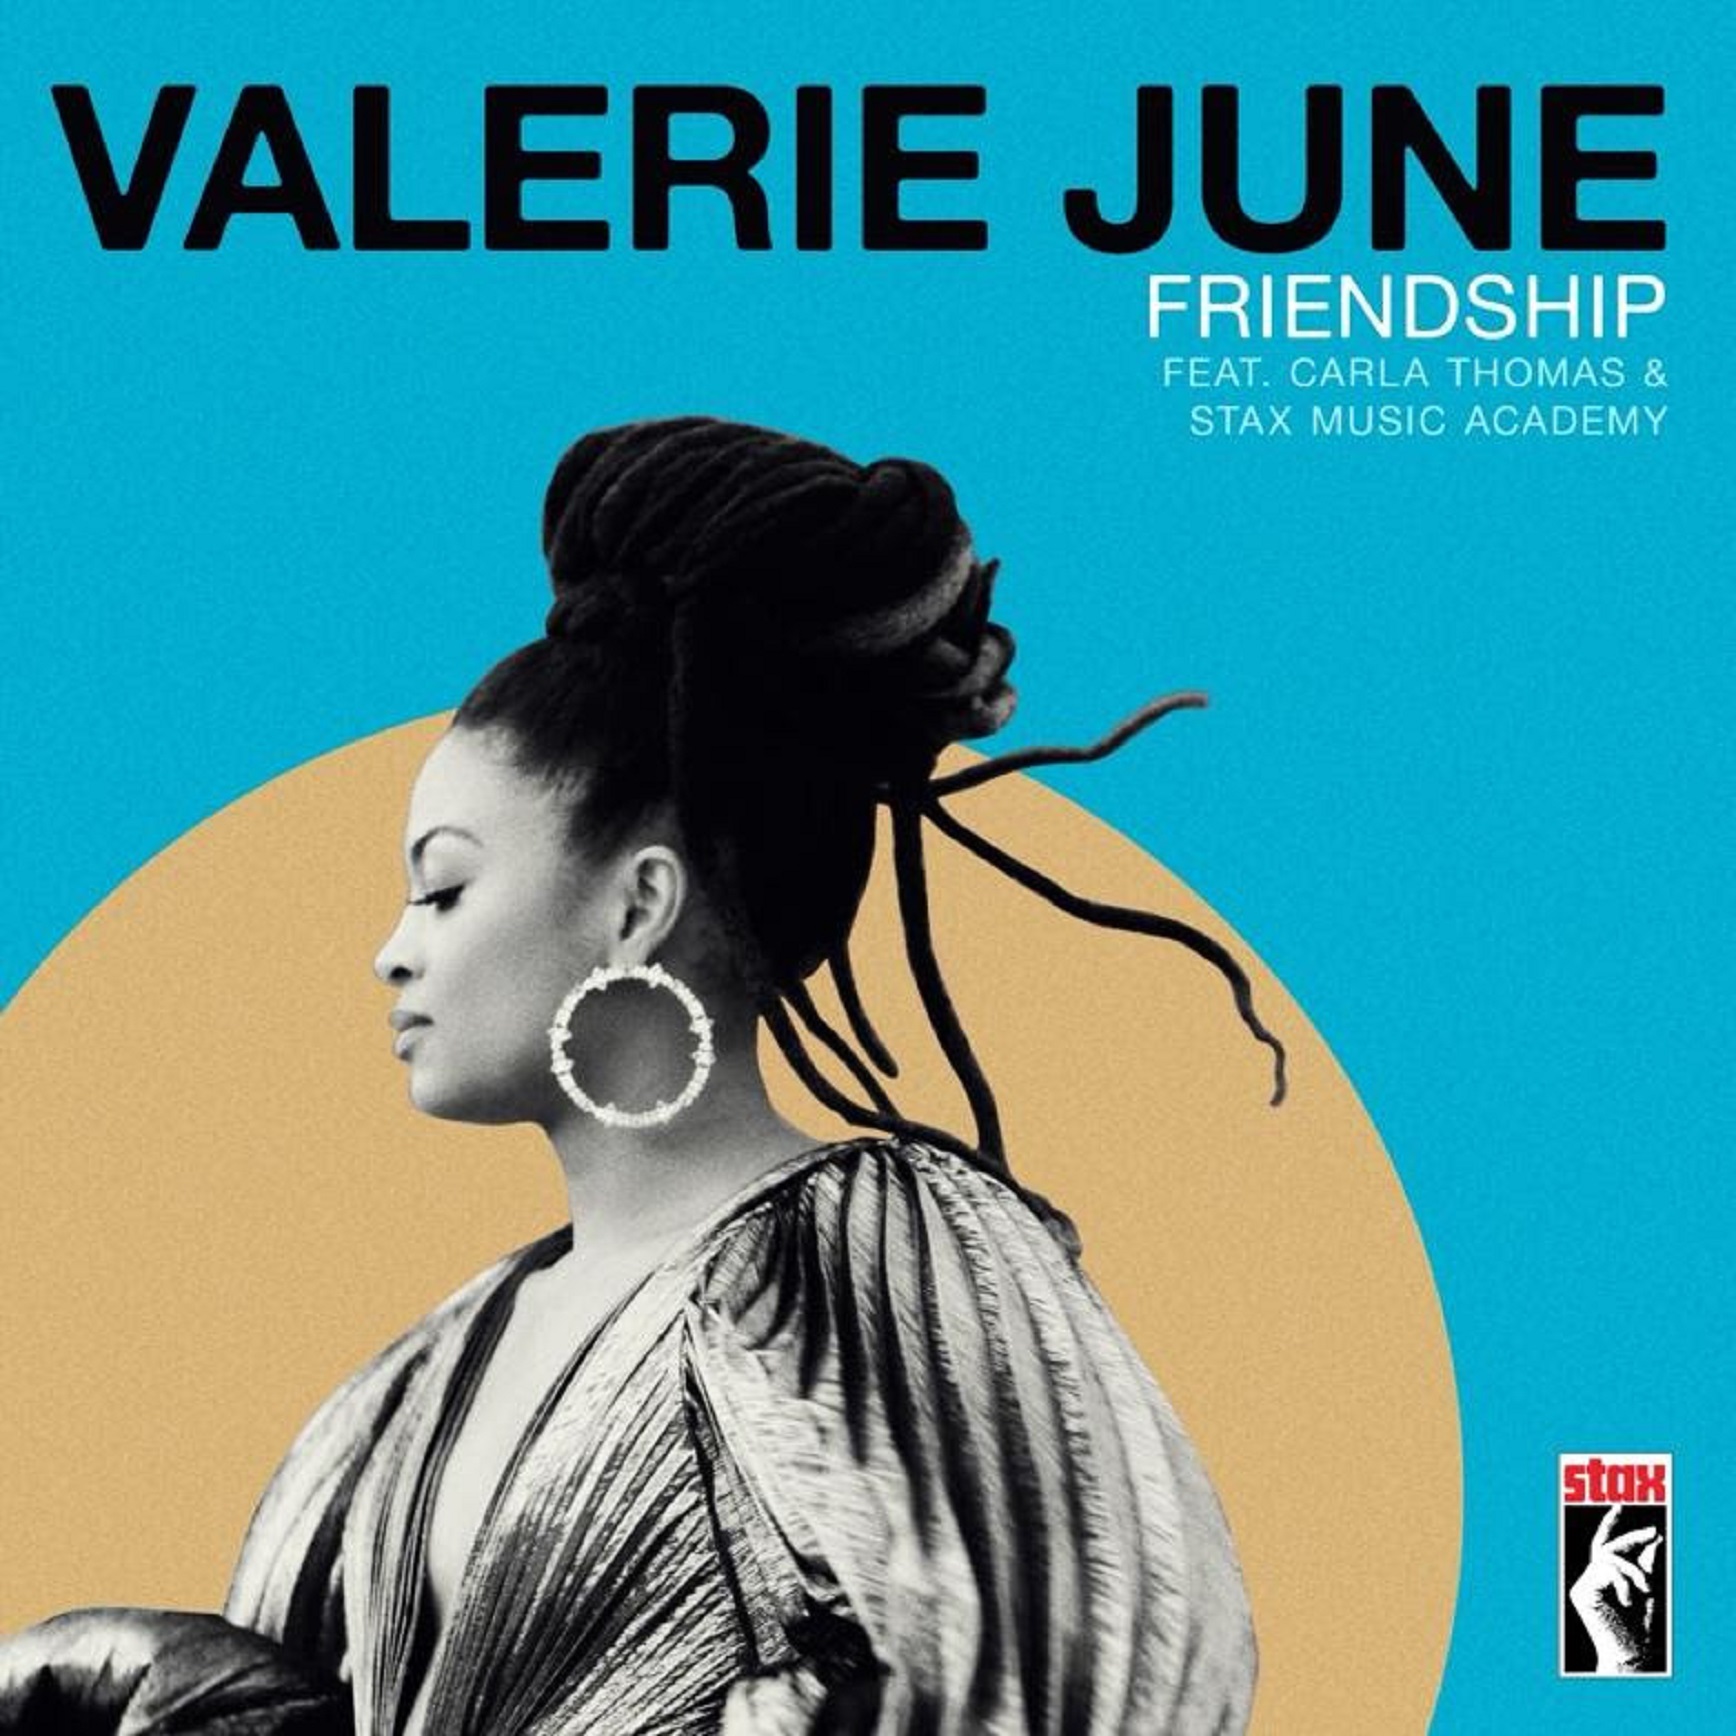 Valerie June taps Carla Thomas for song to honor Stax legacy + Mavis Staples' 85th bday